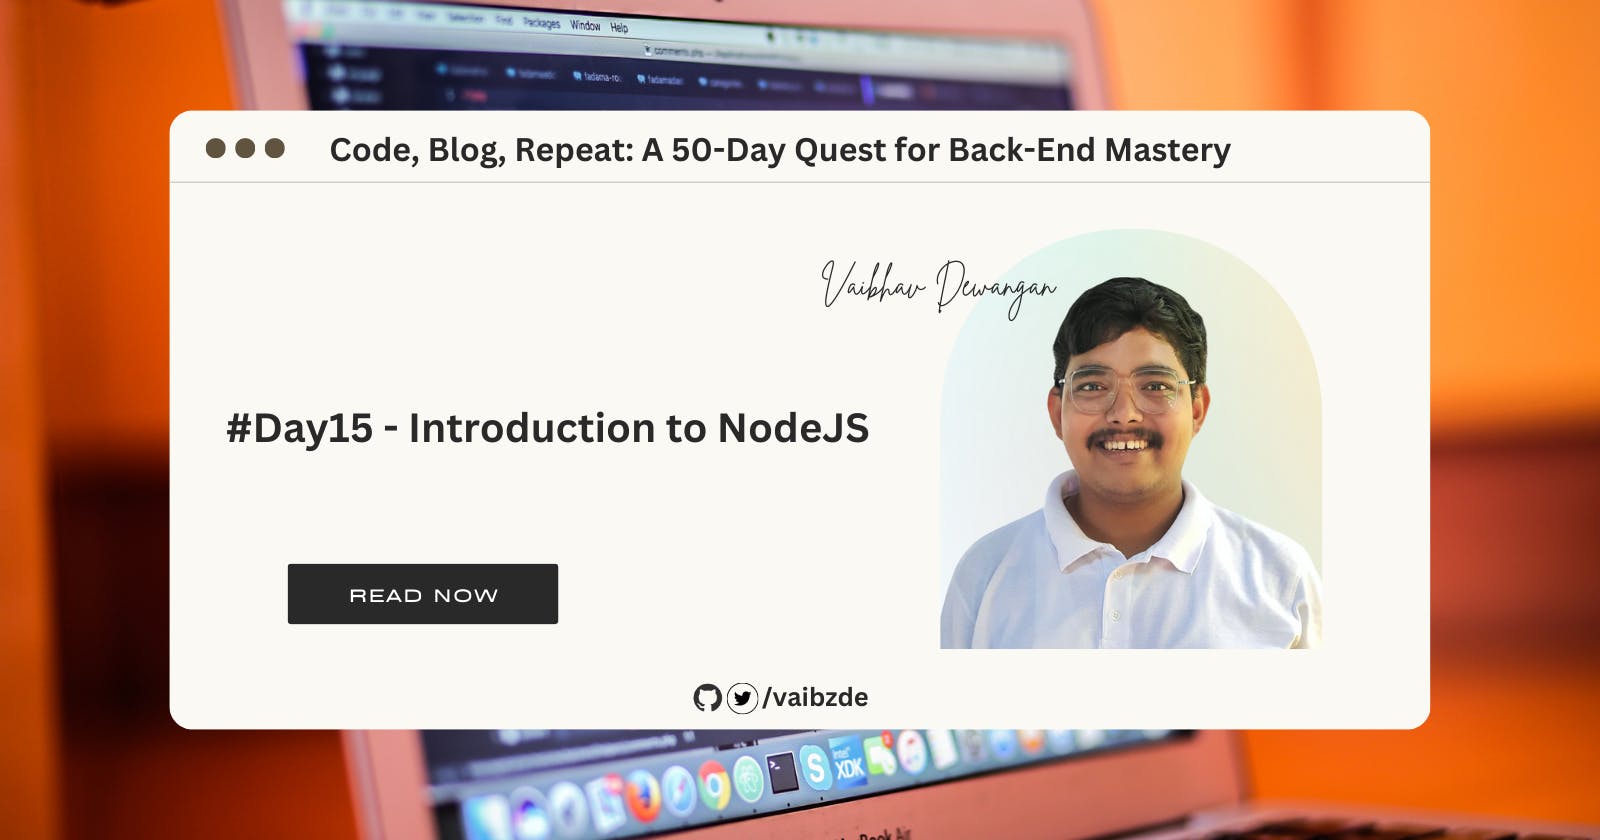 #Day15 - Introduction to NodeJS